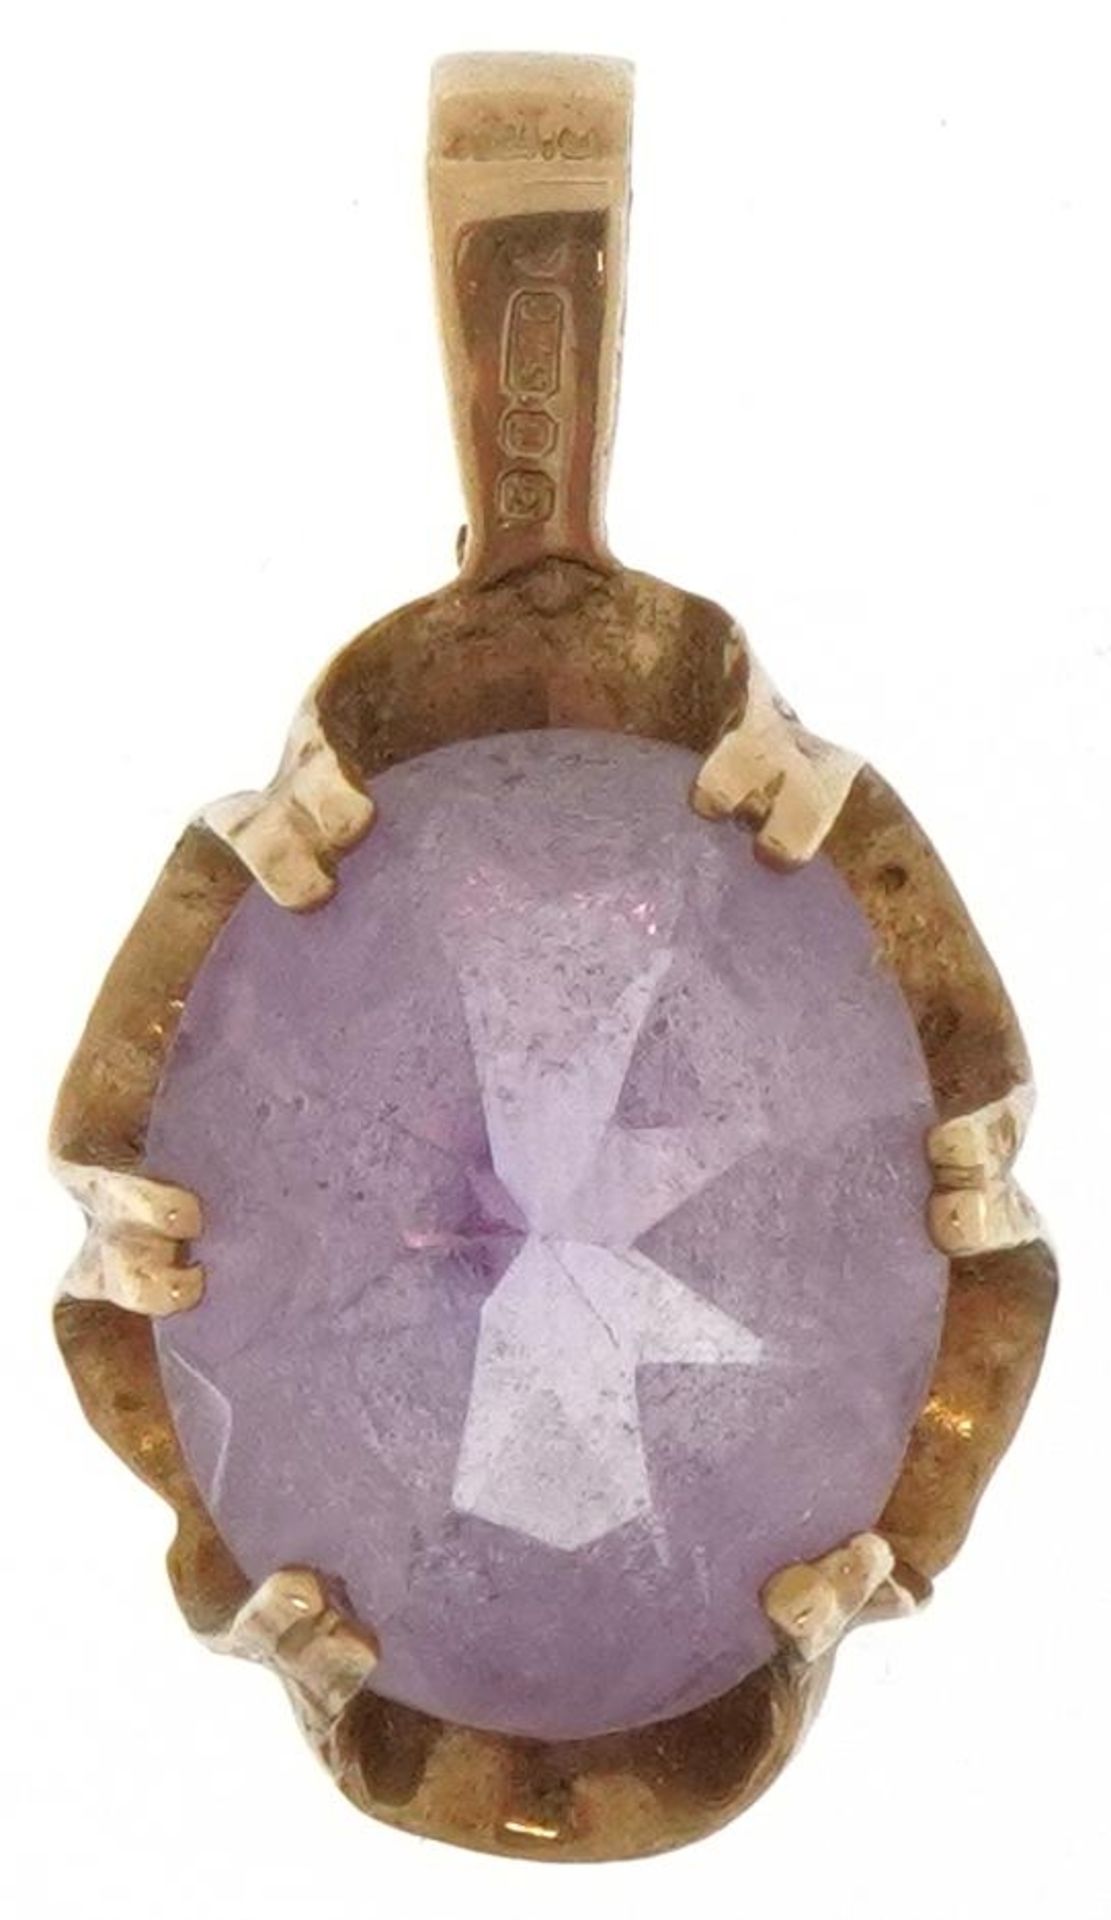 9ct gold amethyst solitaire pendant, 1.8cm high, 1.5g